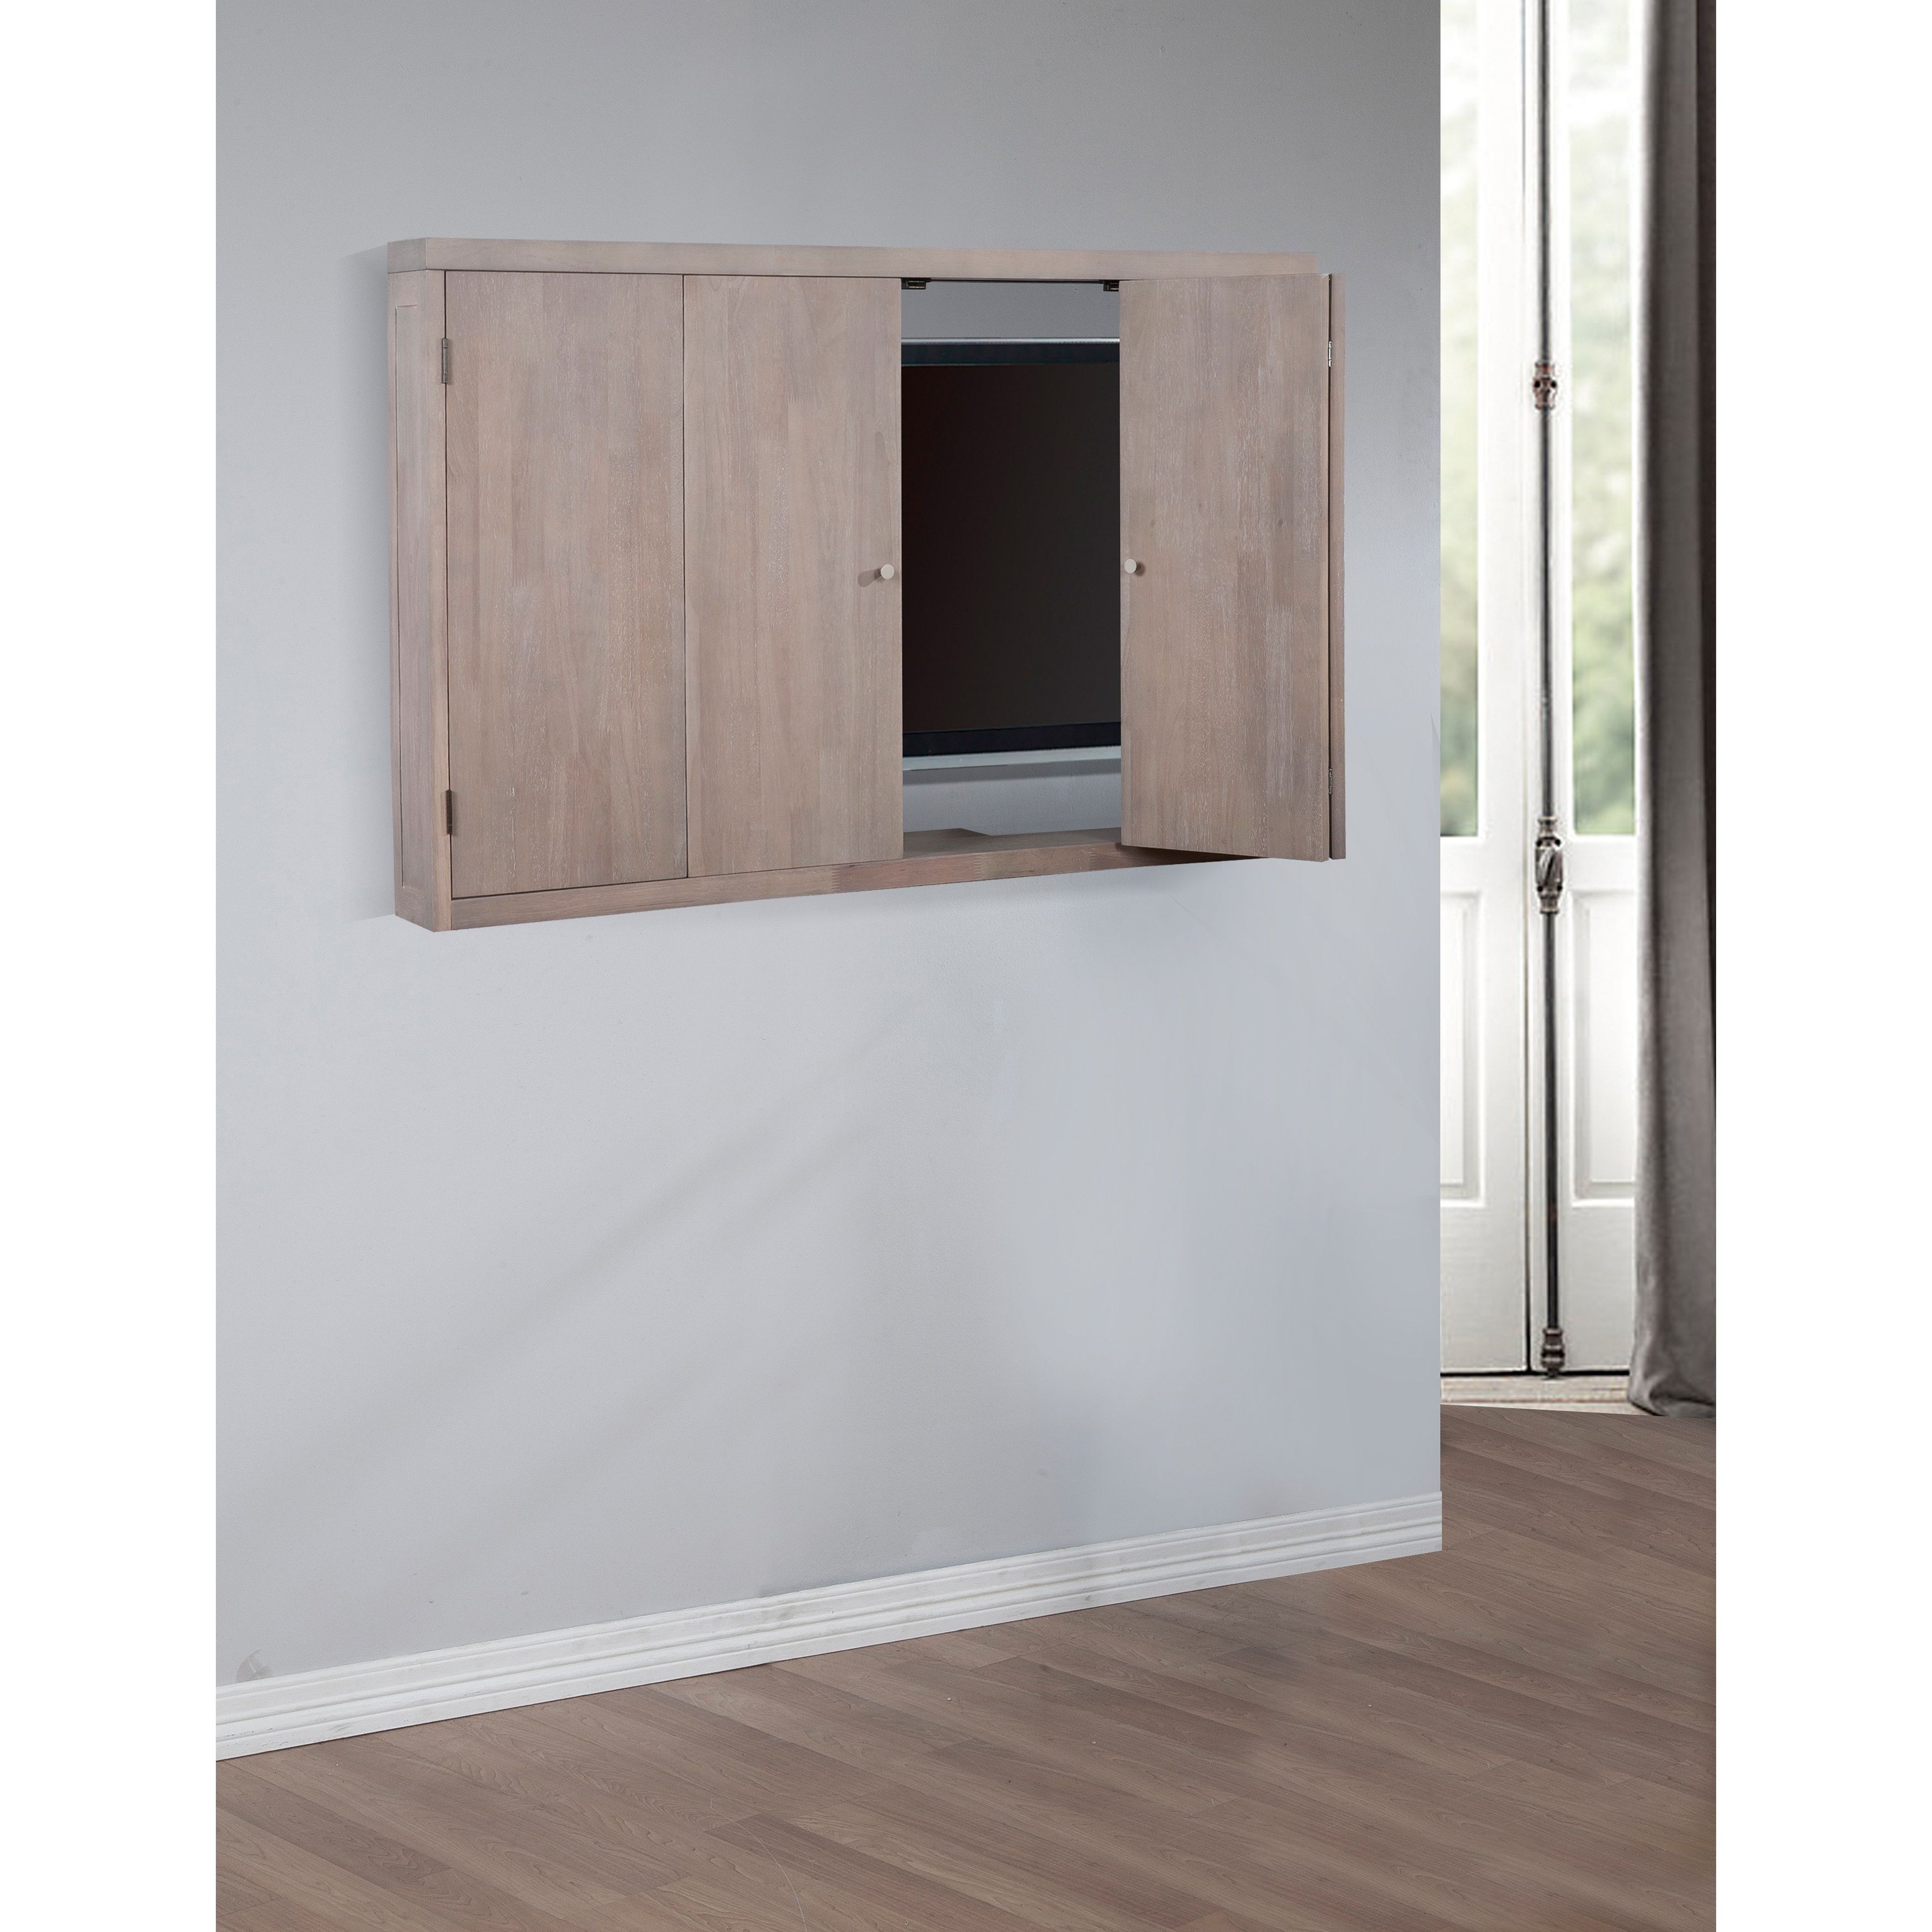 Wall Mounted Tv Cabinets For Flat Screens With Doors Throughout Well Known Hide Tv Cabinets For Flat Screens – Image Cabinets And Shower Mandra (Photo 11 of 20)